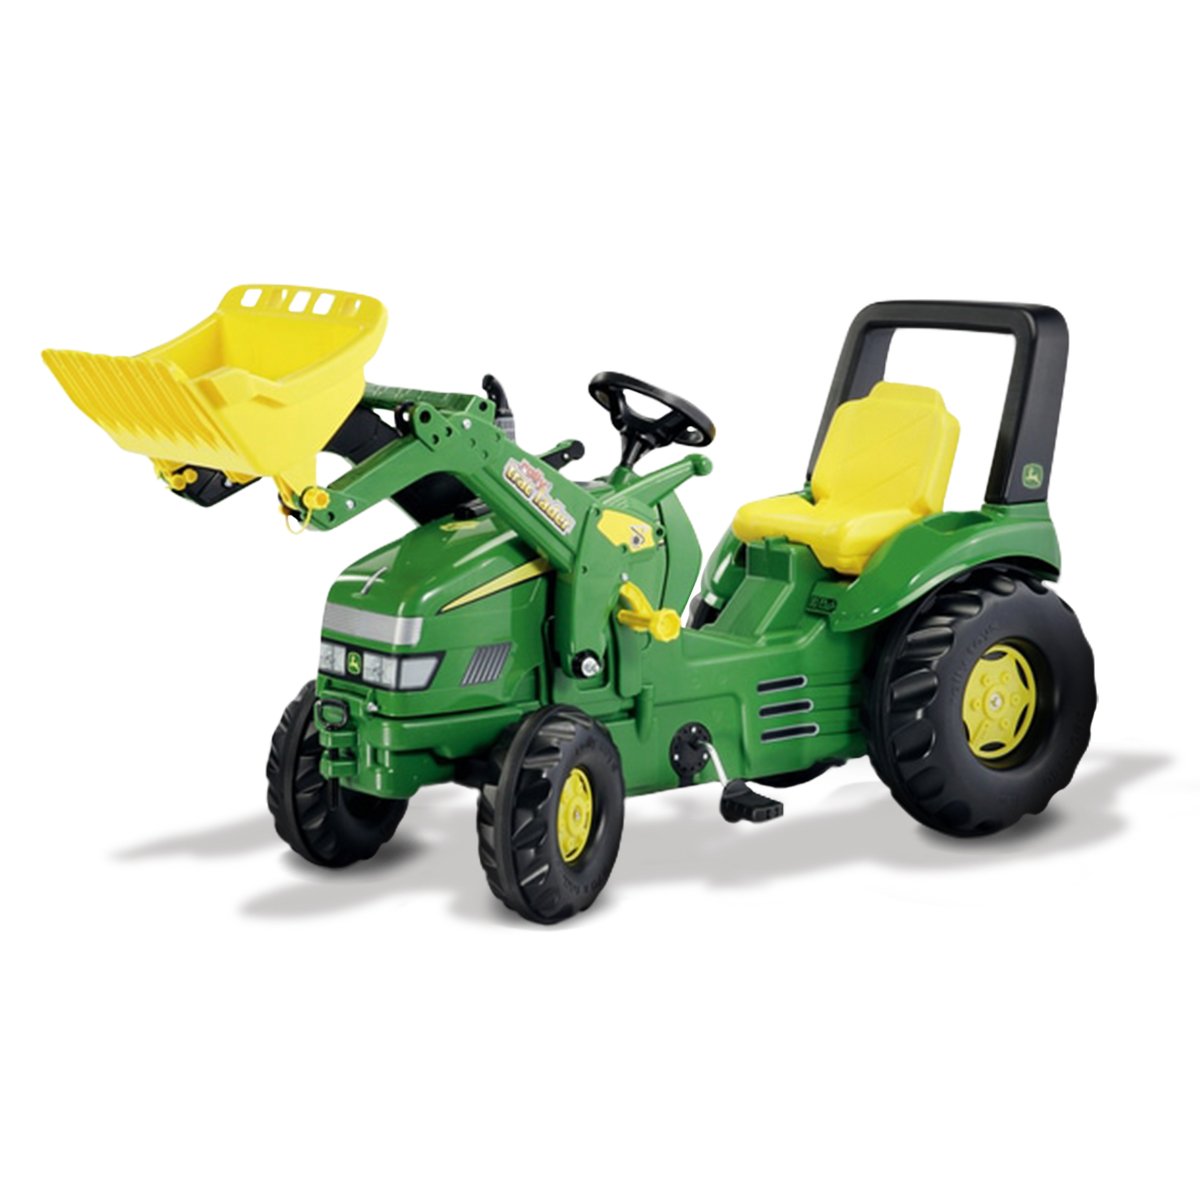 John Deere Kids Premium Ride on Tractor with Maxi Loader RT046638 1